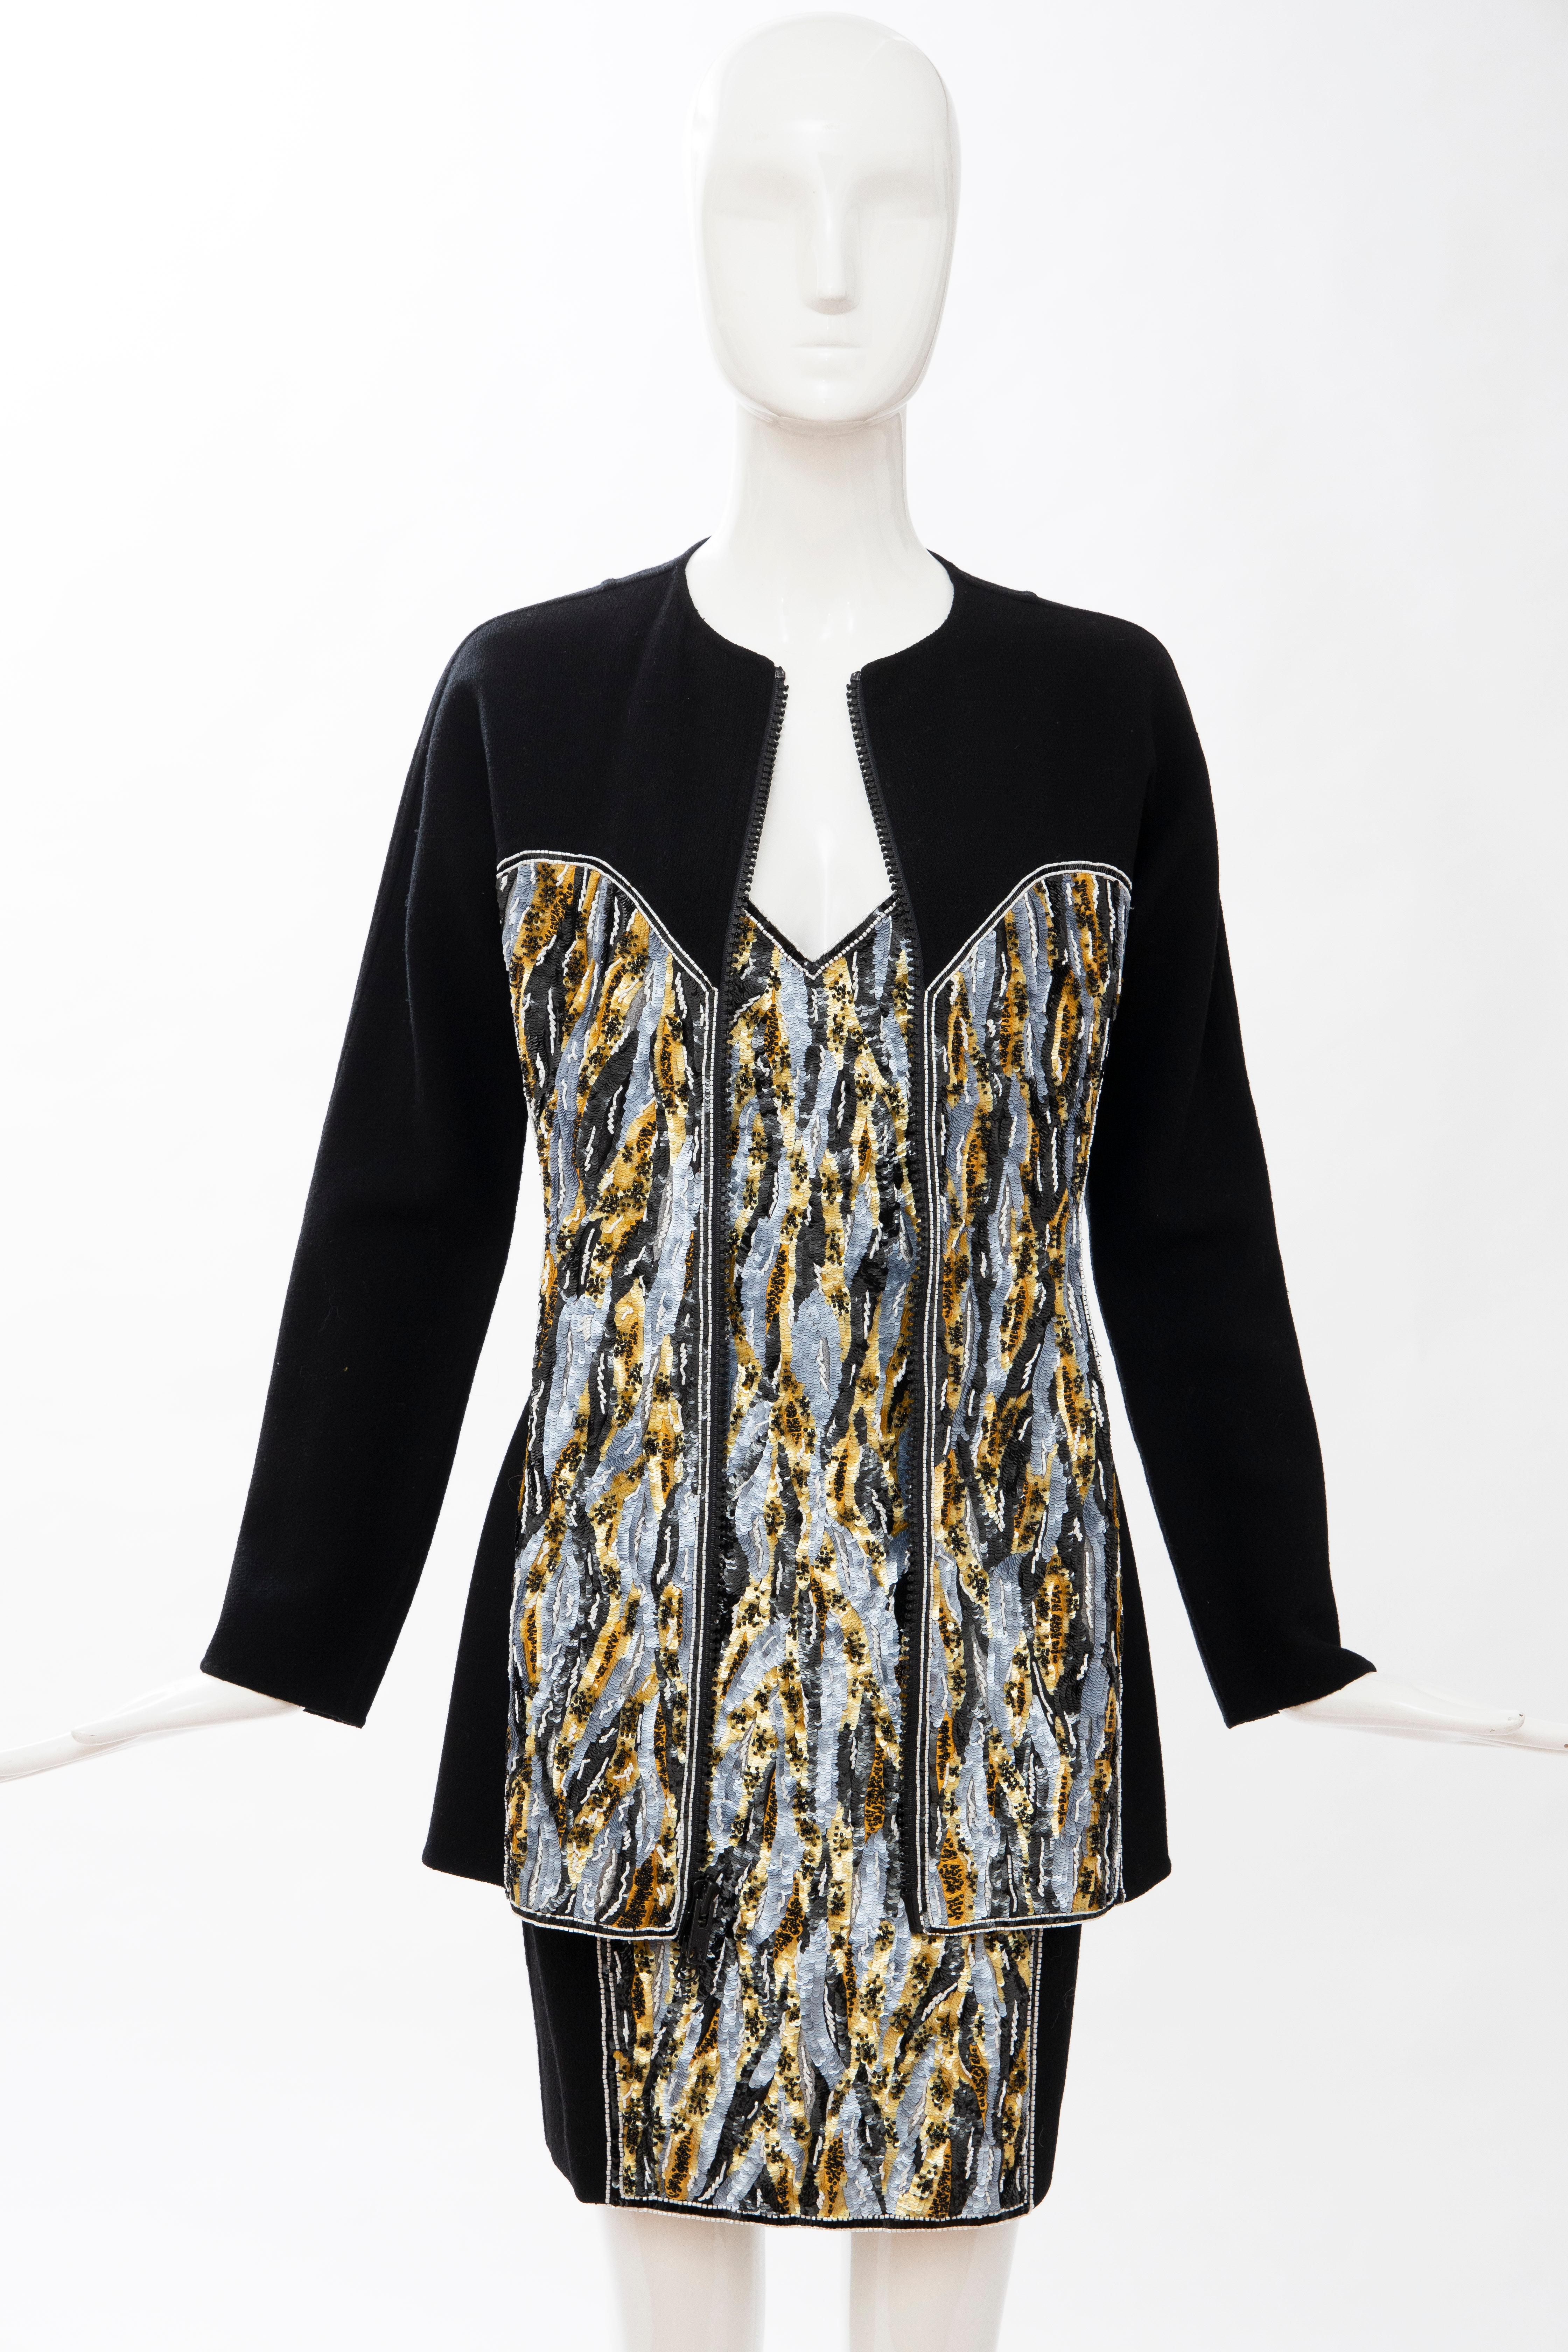 Geoffrey Beene Black Wool Crepe Embroidered Sequins Dress Ensemble, Circa 1990's For Sale 2